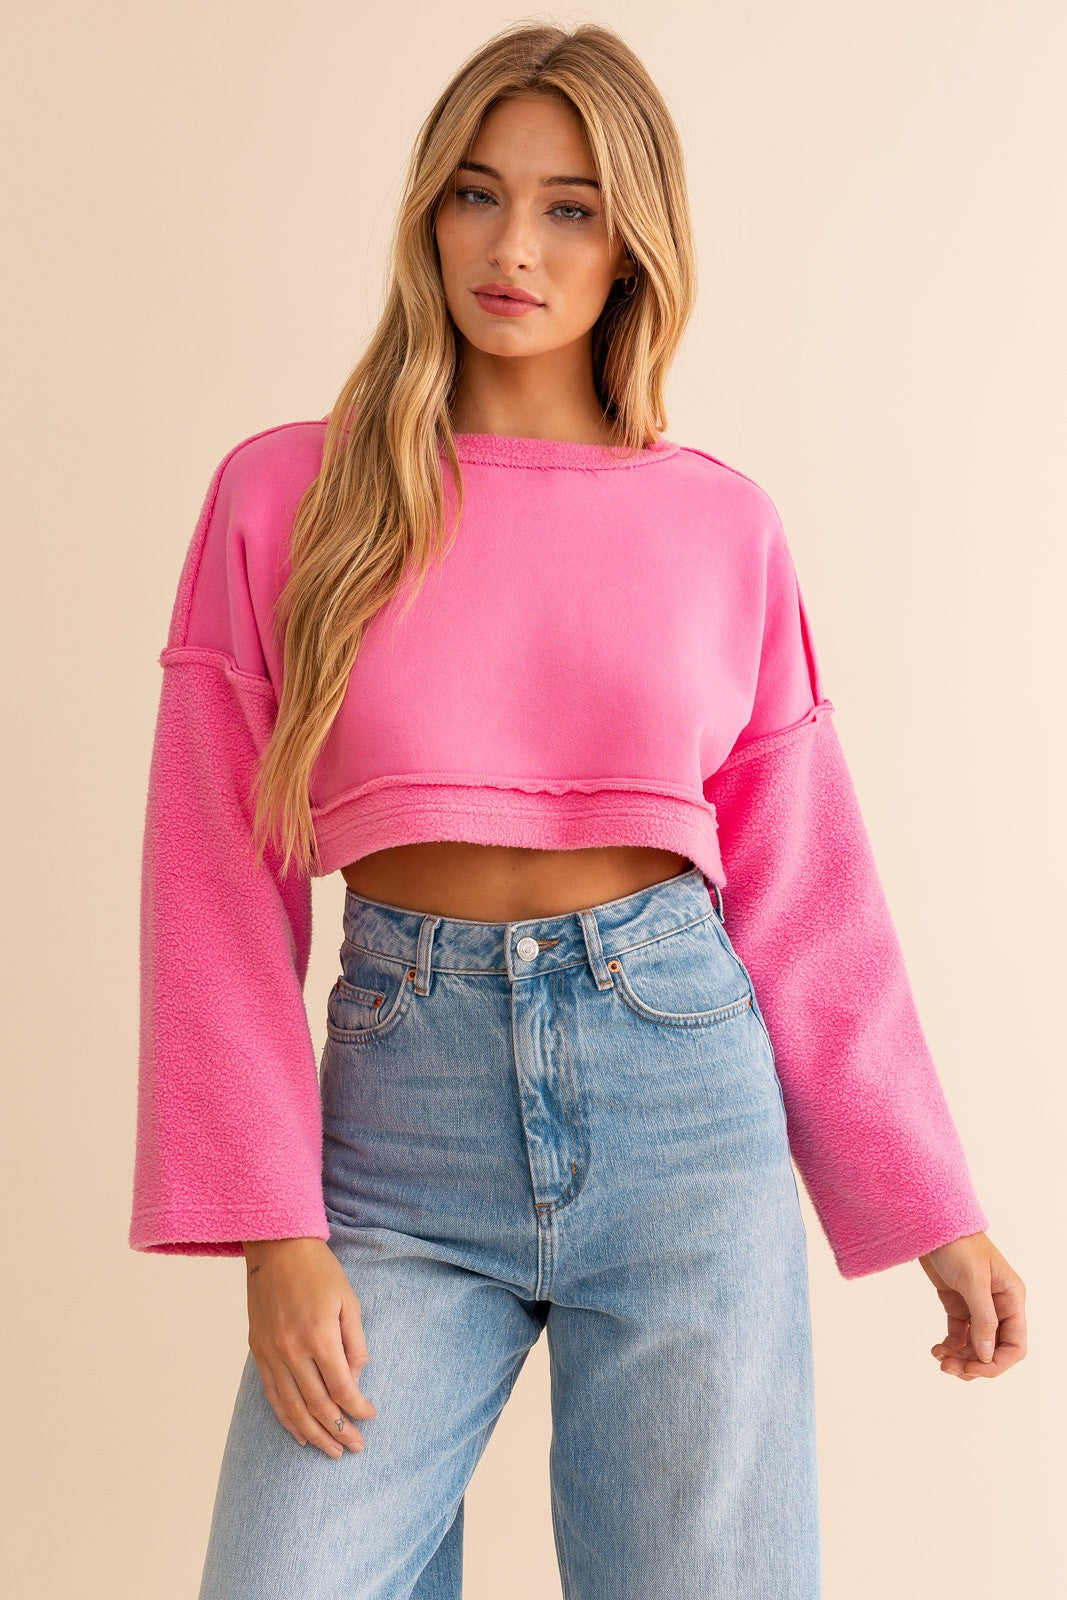 The Barbie Pink Pullover